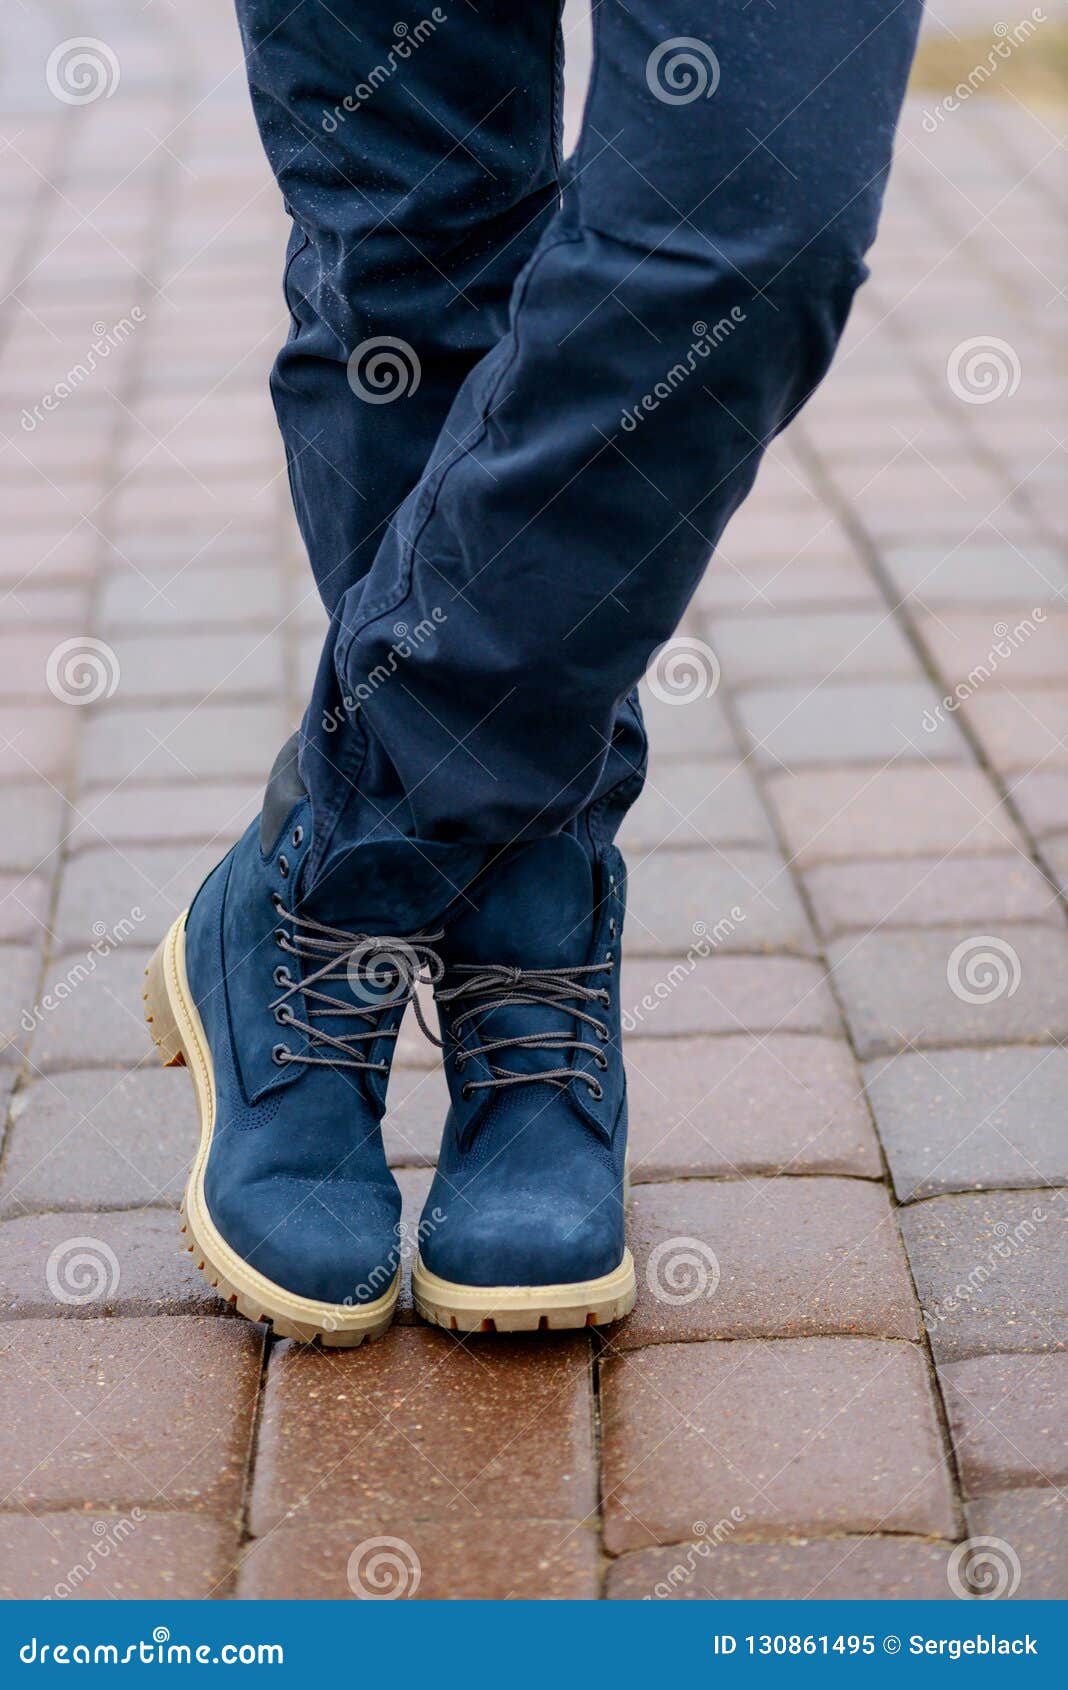 Blue Boots on Men`s Legs in Blue Jeans Stock Image - Image of boot, field:  130861495